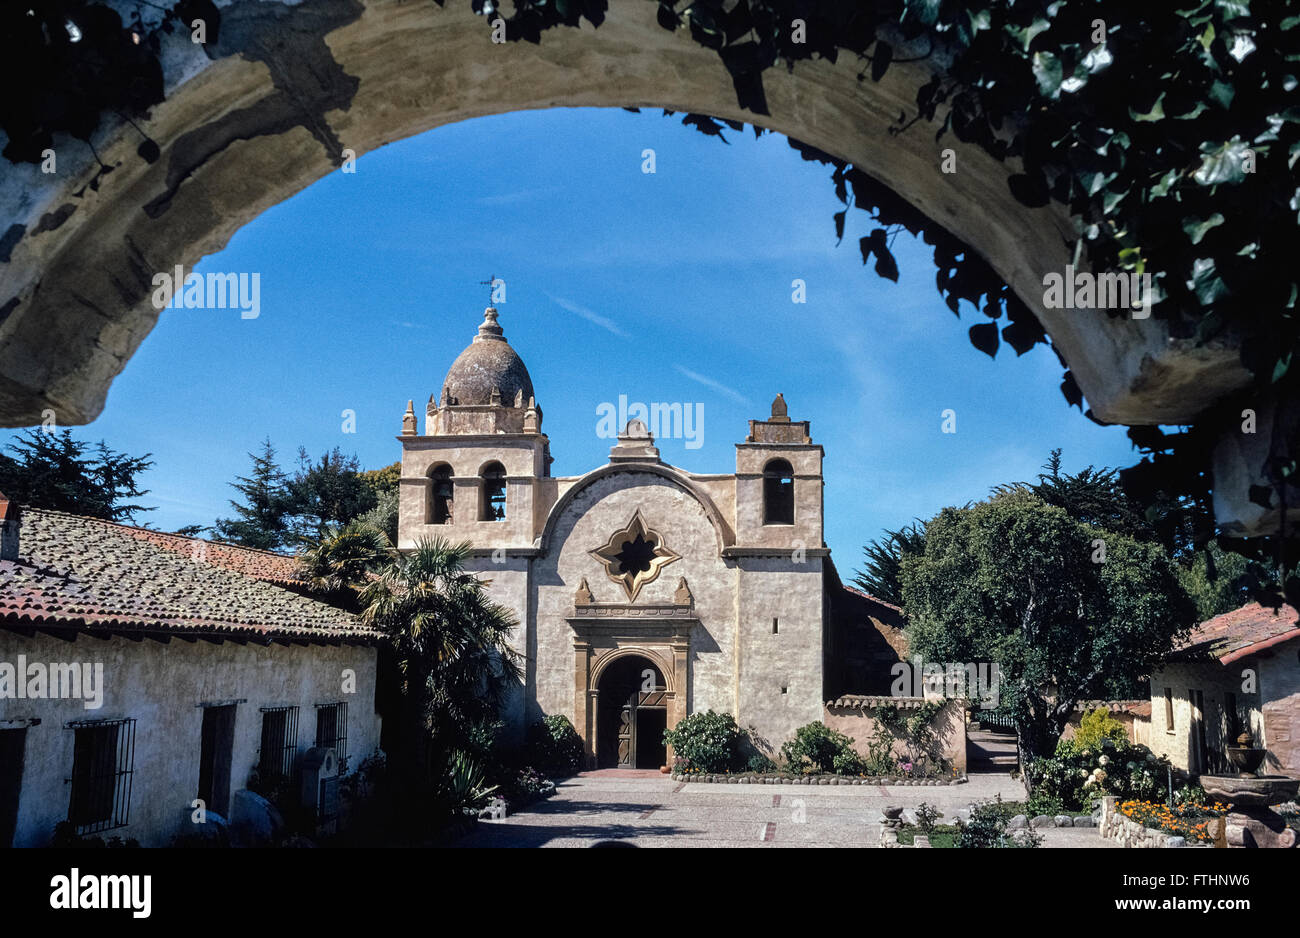 The Basilica Church of Mission San Carlos Borromeo de Carmelo was founded in 1771 by Father Junipero Serra  in what is now Carmel, California, USA. The fabled Spanish priest who was a Franciscan friar became a Catholic saint when canonized by Pope Francis in September, 2015. The Carmel mission was the second of 21 California missions established up and down the state; it was one of nine founded by Saint Serra. He died there in1784 at the age of 70 and is buried under the sanctuary floor. Stock Photo